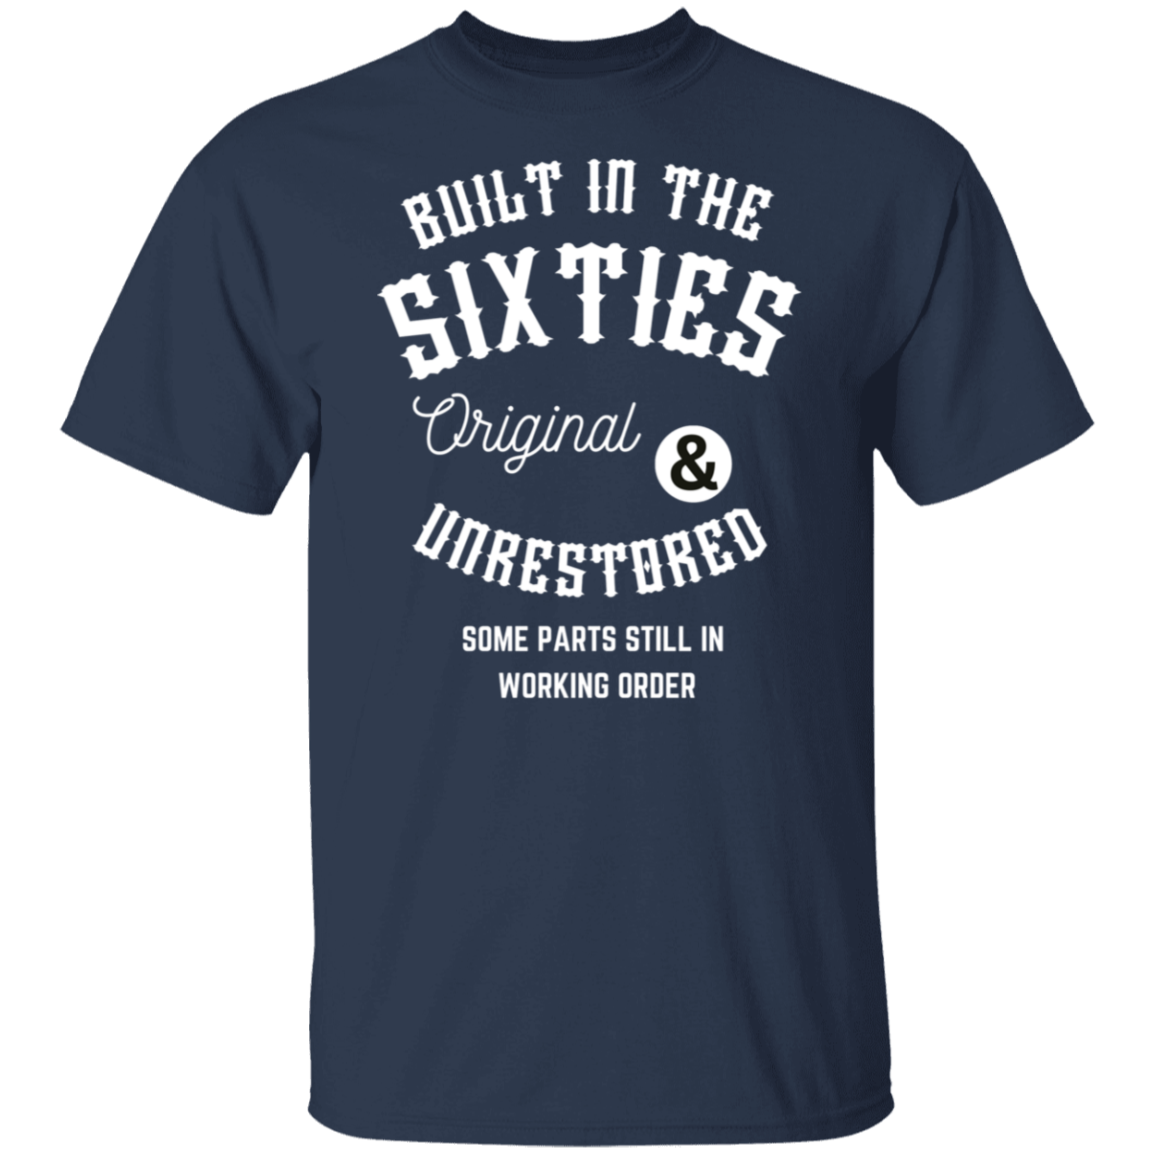 BUILT IN THE SIXITIES  5.3 oz. T-Shirt